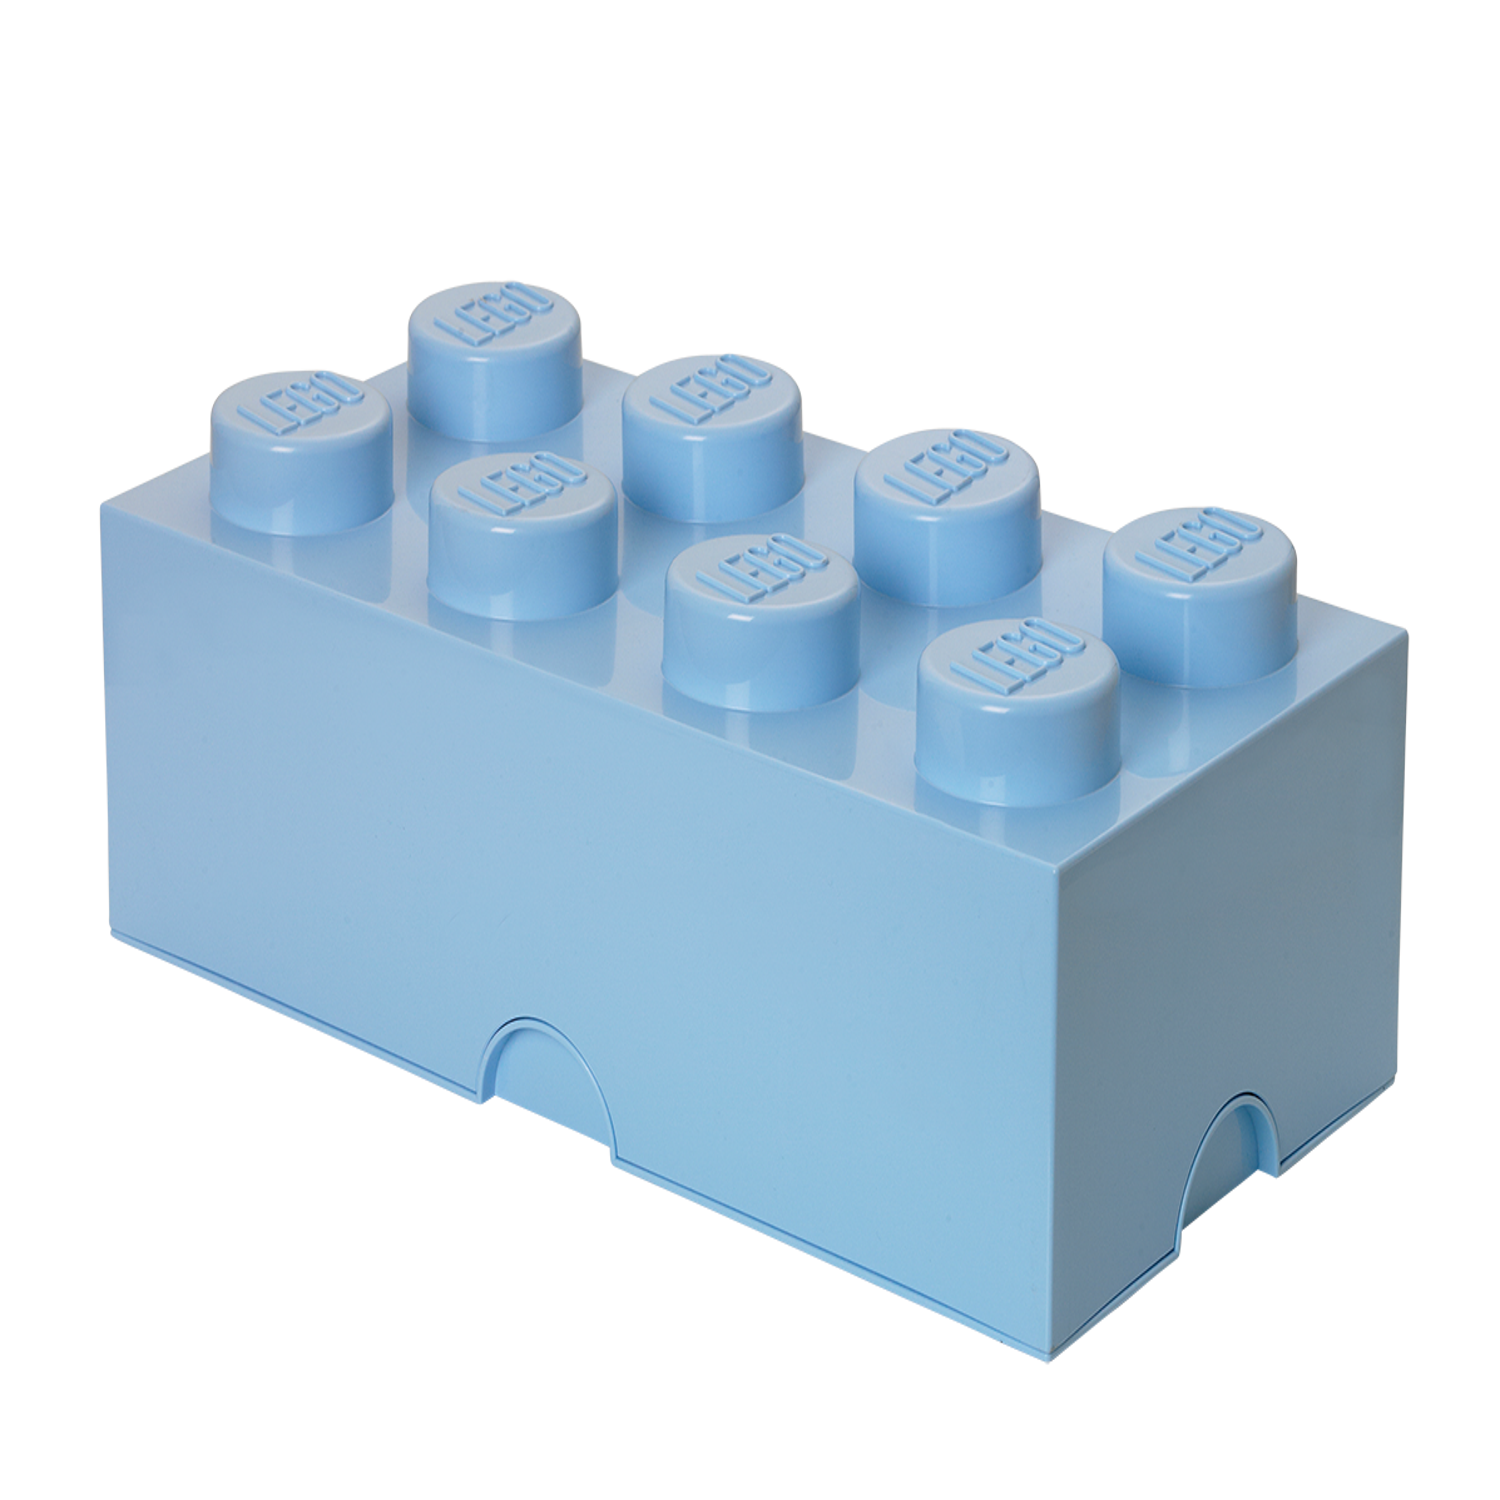 Set of Two Large and Small Blue Lego Shaped Toy Storage Containers